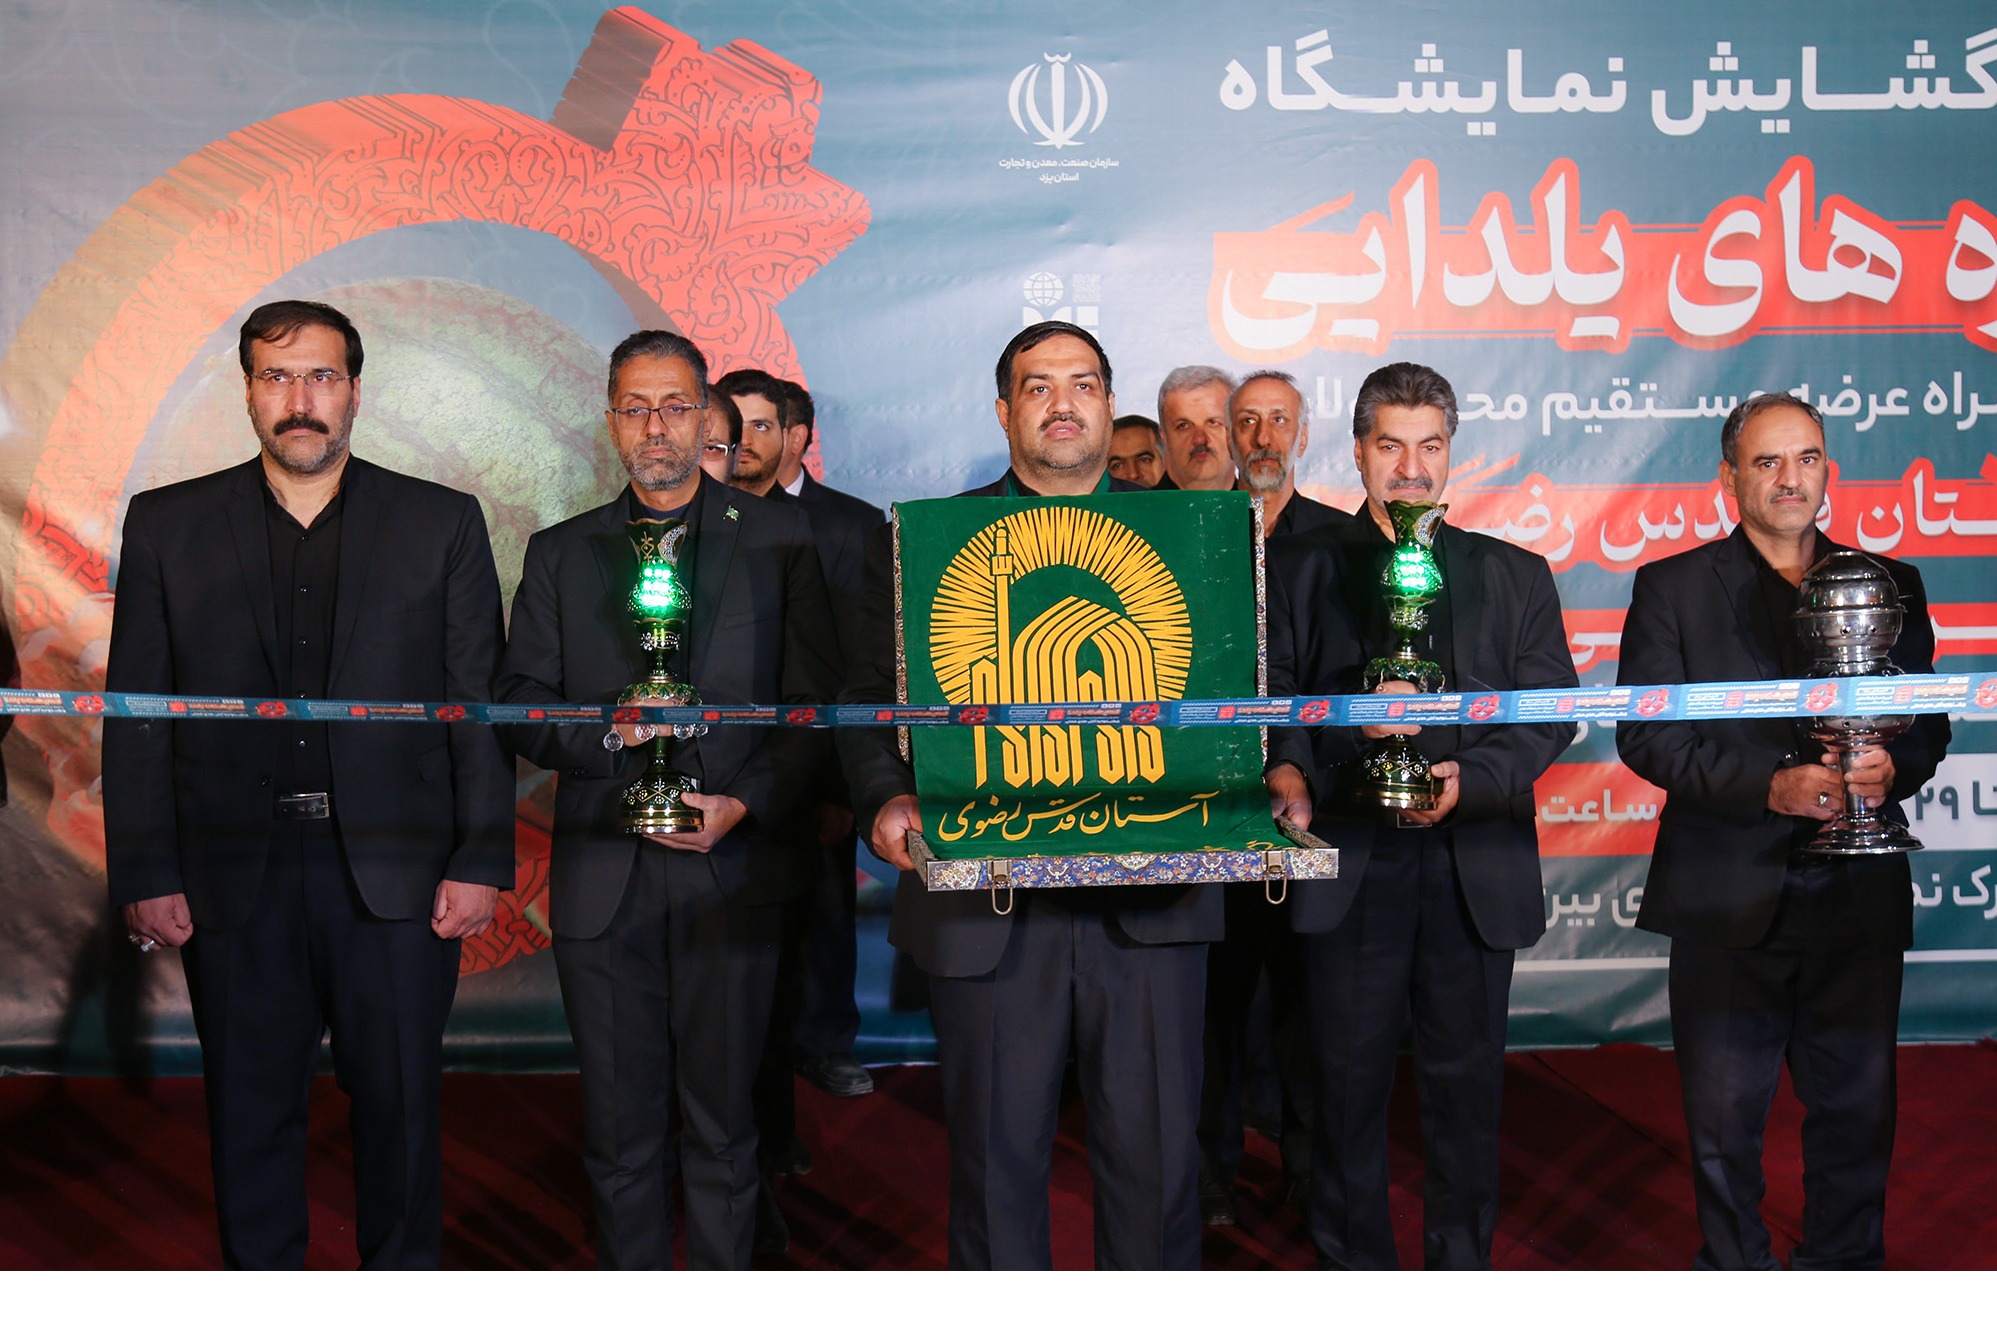 Video report of the opening ceremony of the Yalda tableware exhibition with the presence of Razavi's